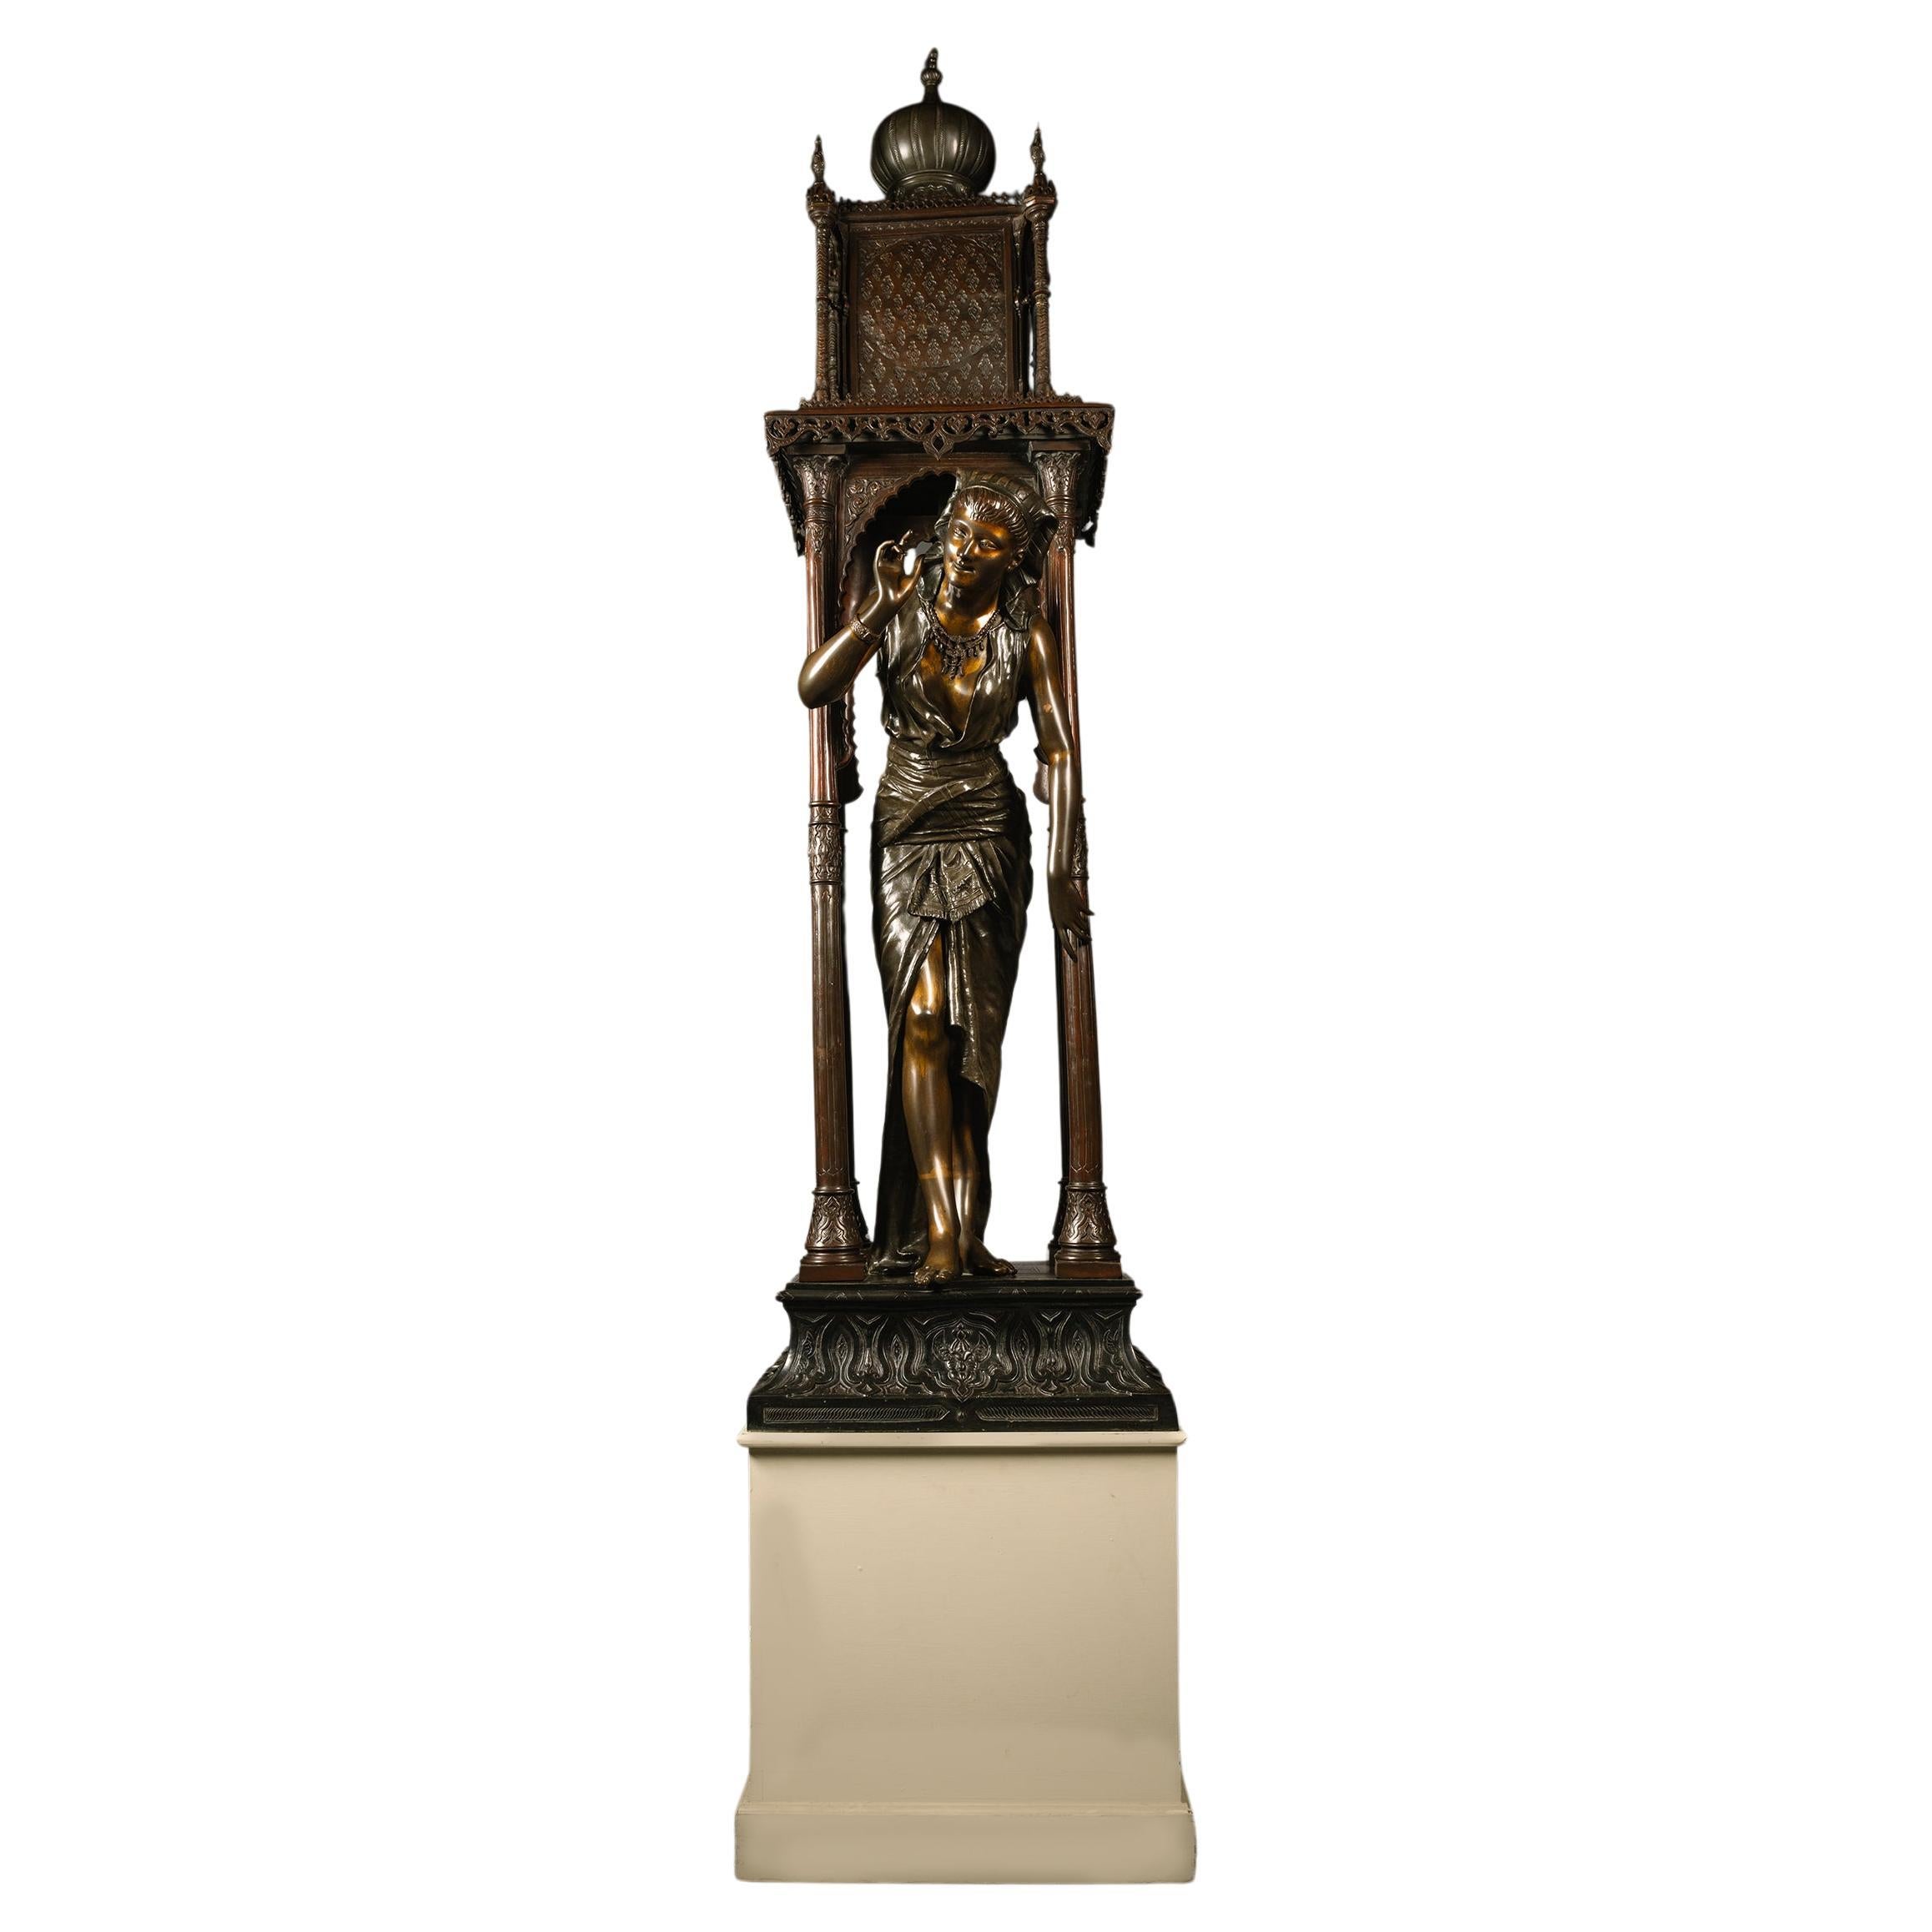 An Orientalist Lifesize Figural Bronze Statue, Attributed to Louis Hottot